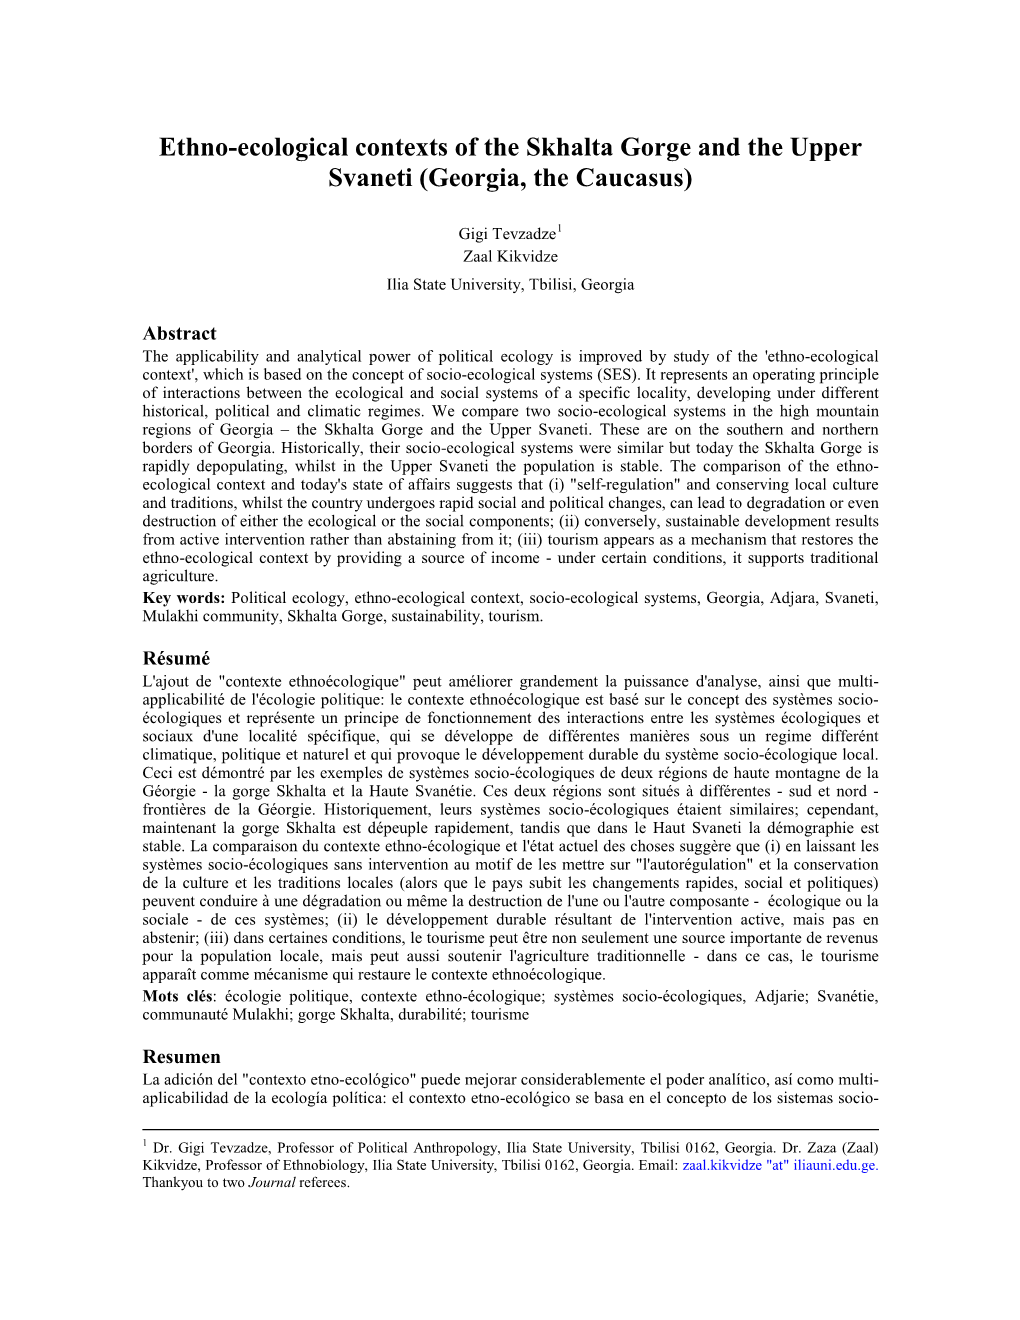 Ethno-Ecological Contexts of the Skhalta Gorge and the Upper Svaneti (Georgia, the Caucasus)